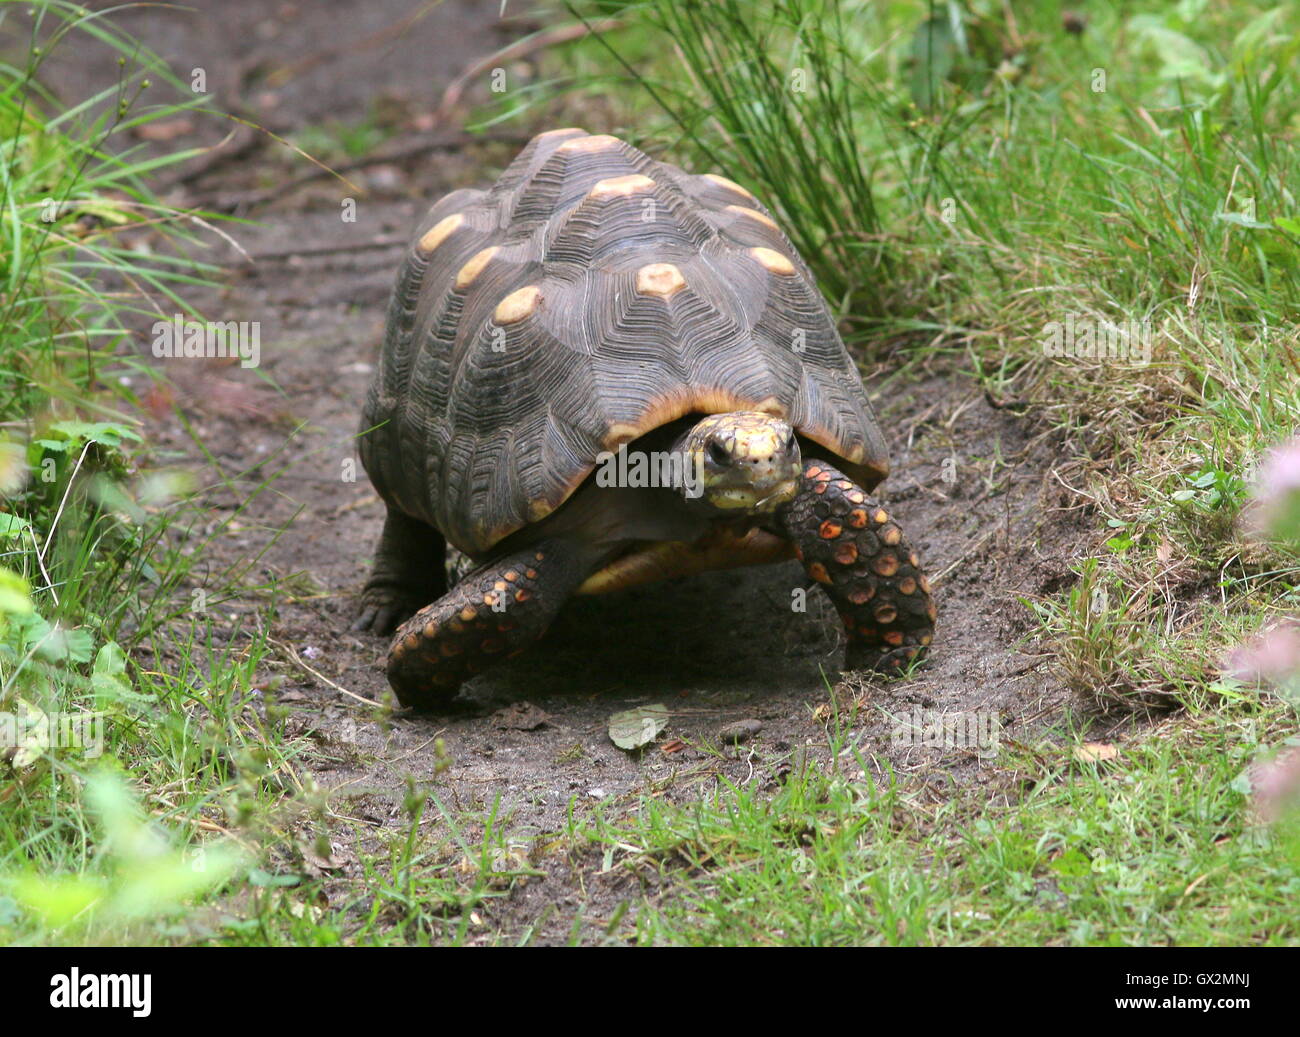 South American Red footed tortoise (Chelonoidis carbonaria) walking towards the camera Stock Photo